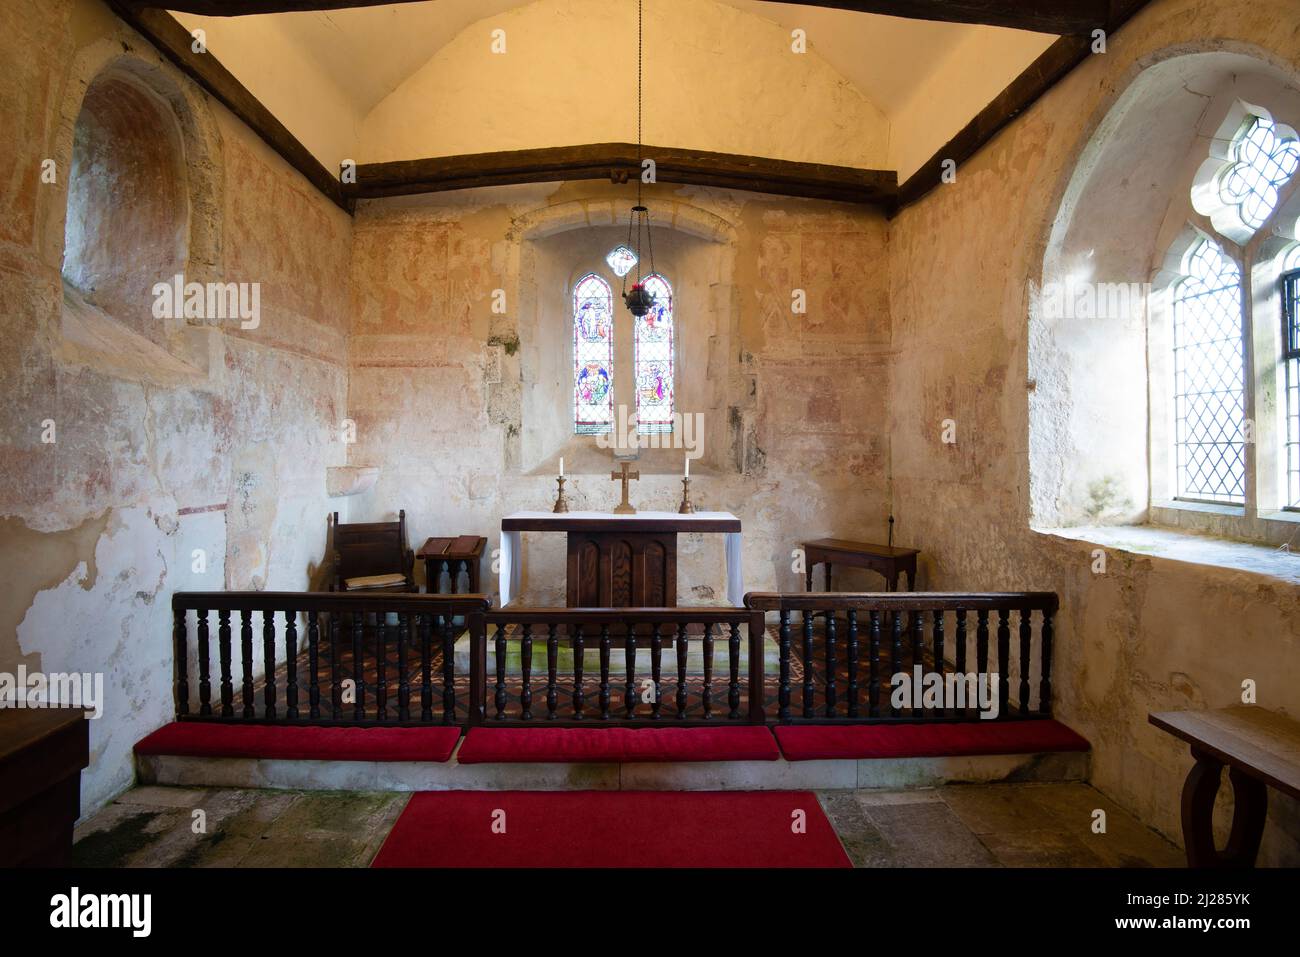 The late 11th century church of St Botolphs noted for it's wall paintings  in the hamlet of Hardham near Pulborough, West Sussex, England, UK Stock Photo